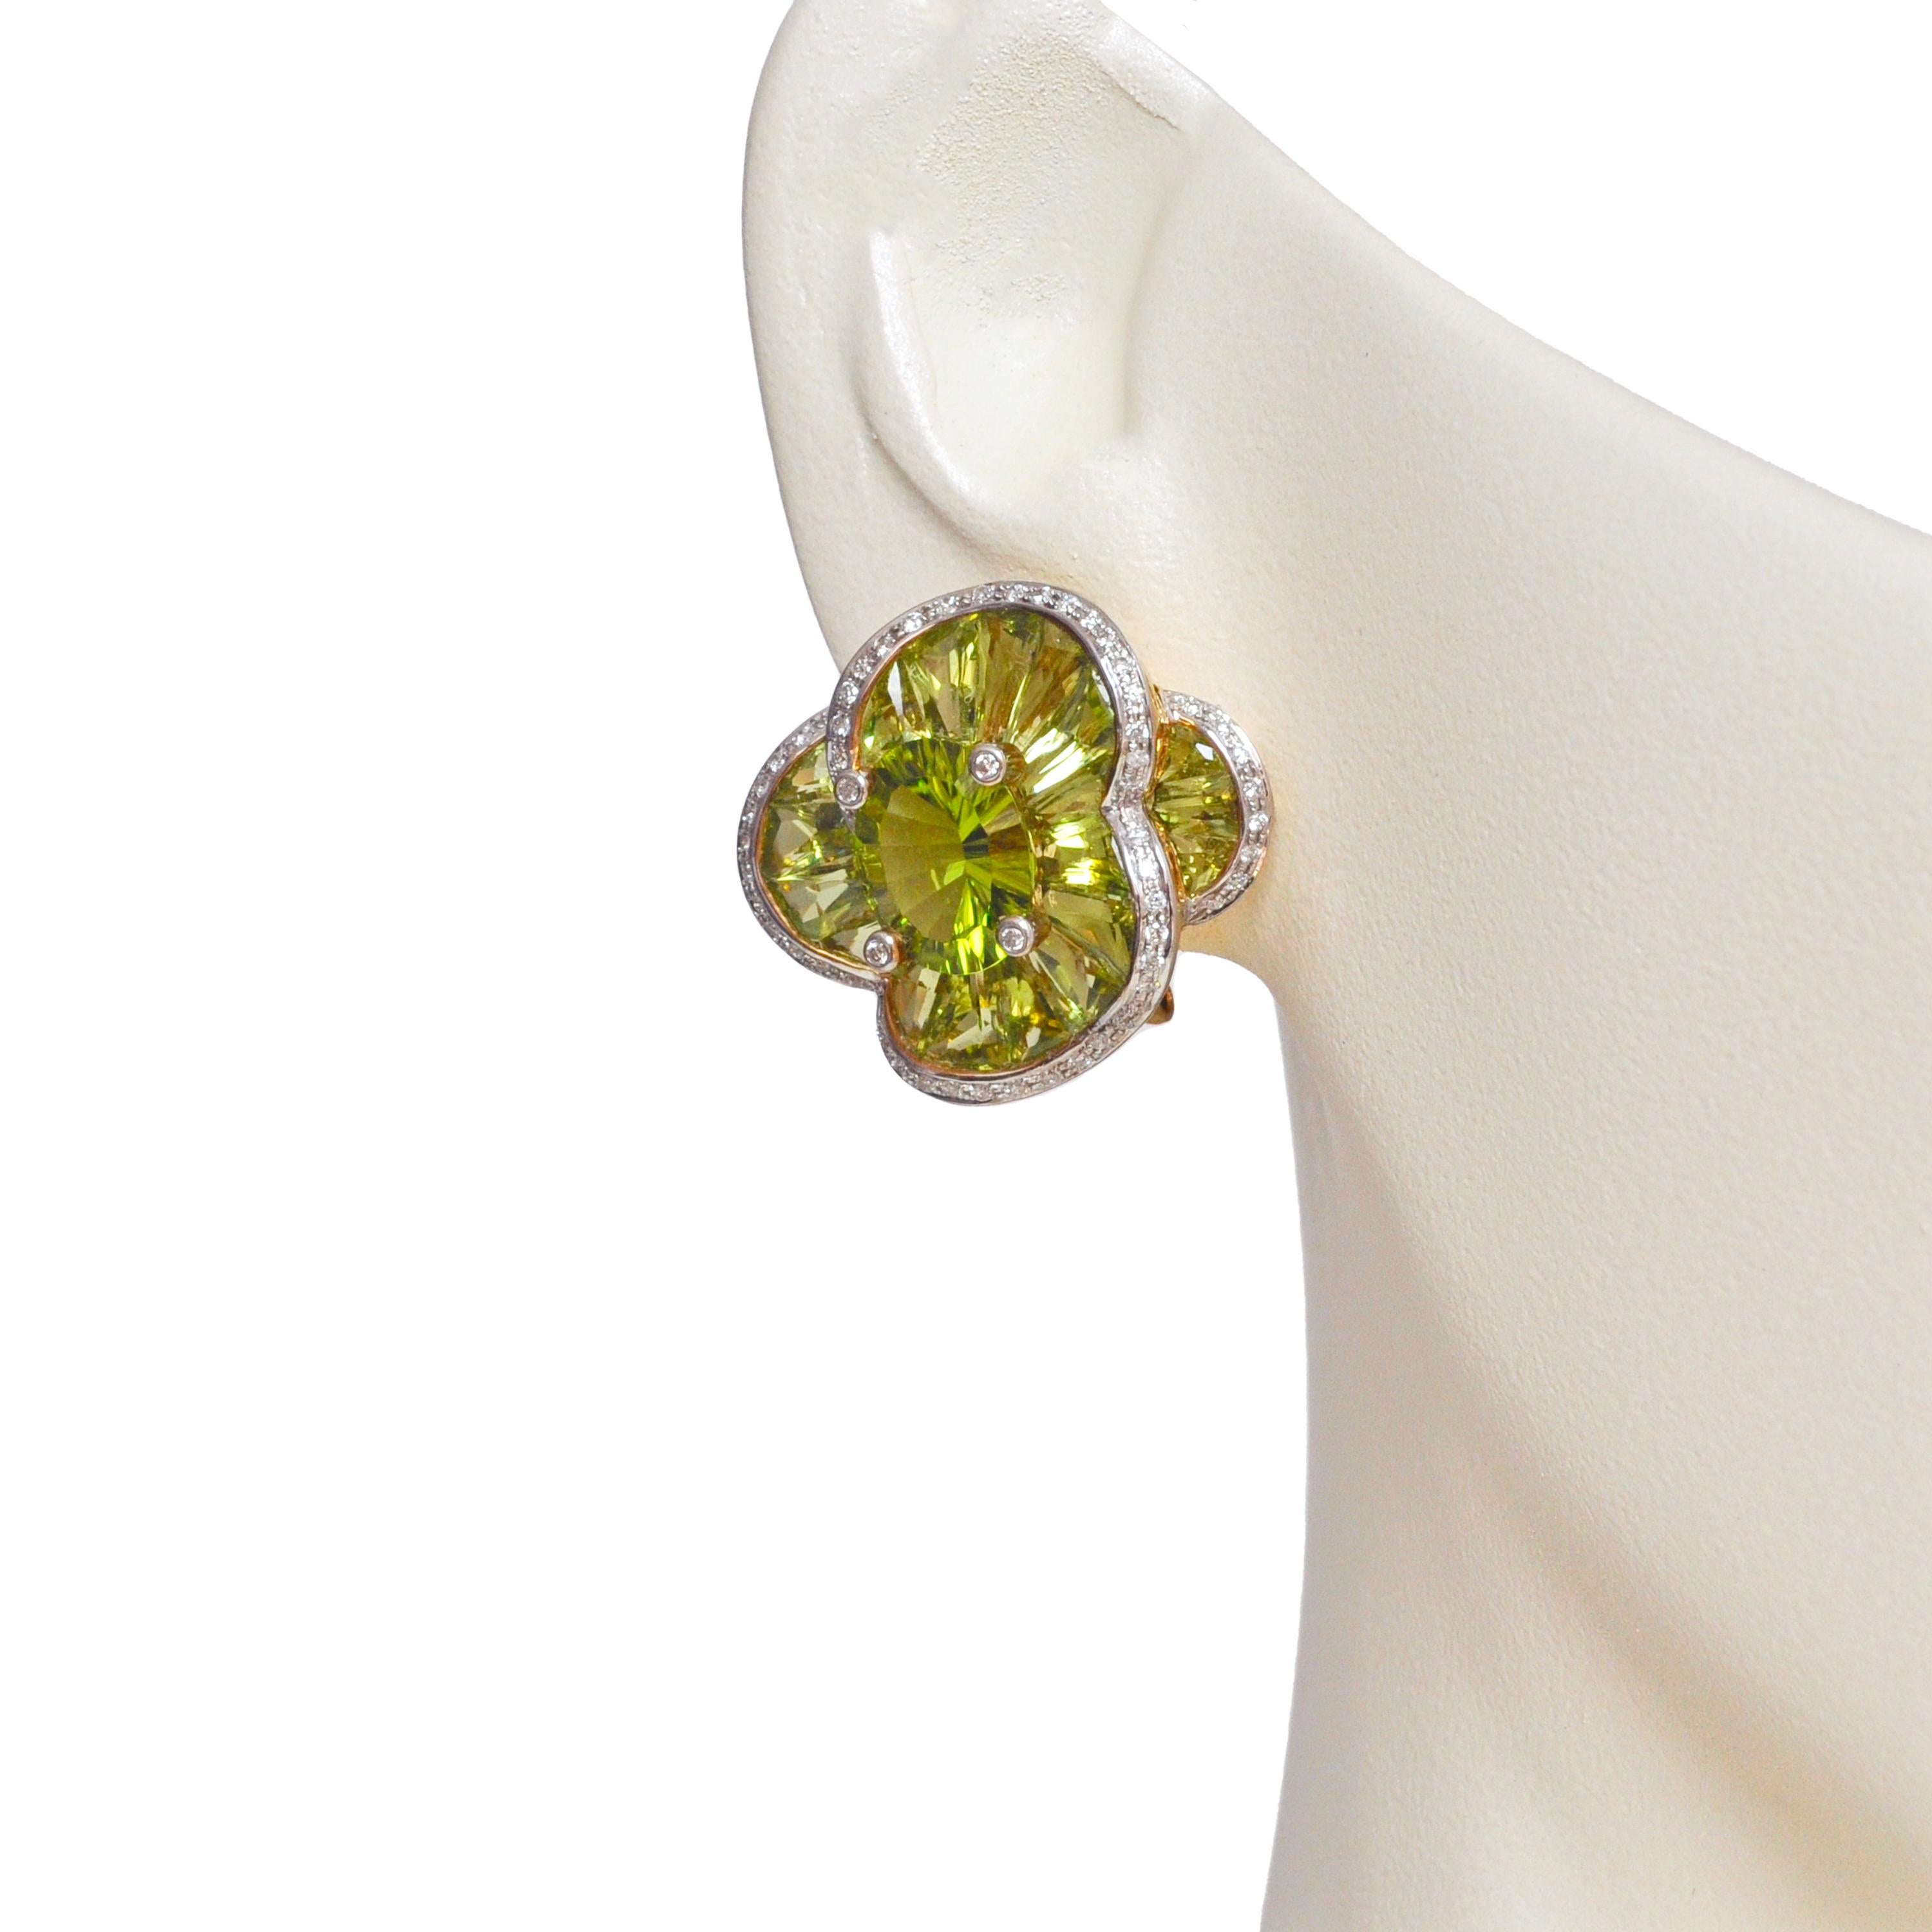 18K yellow gold peridot special cut flower contemporary cocktail stud earrings

Presenting our peridot contemporary stud earrings, a captivating blend of elegance and vibrancy. Crafted in lustrous gold, these stud earrings feature a central oval-cut